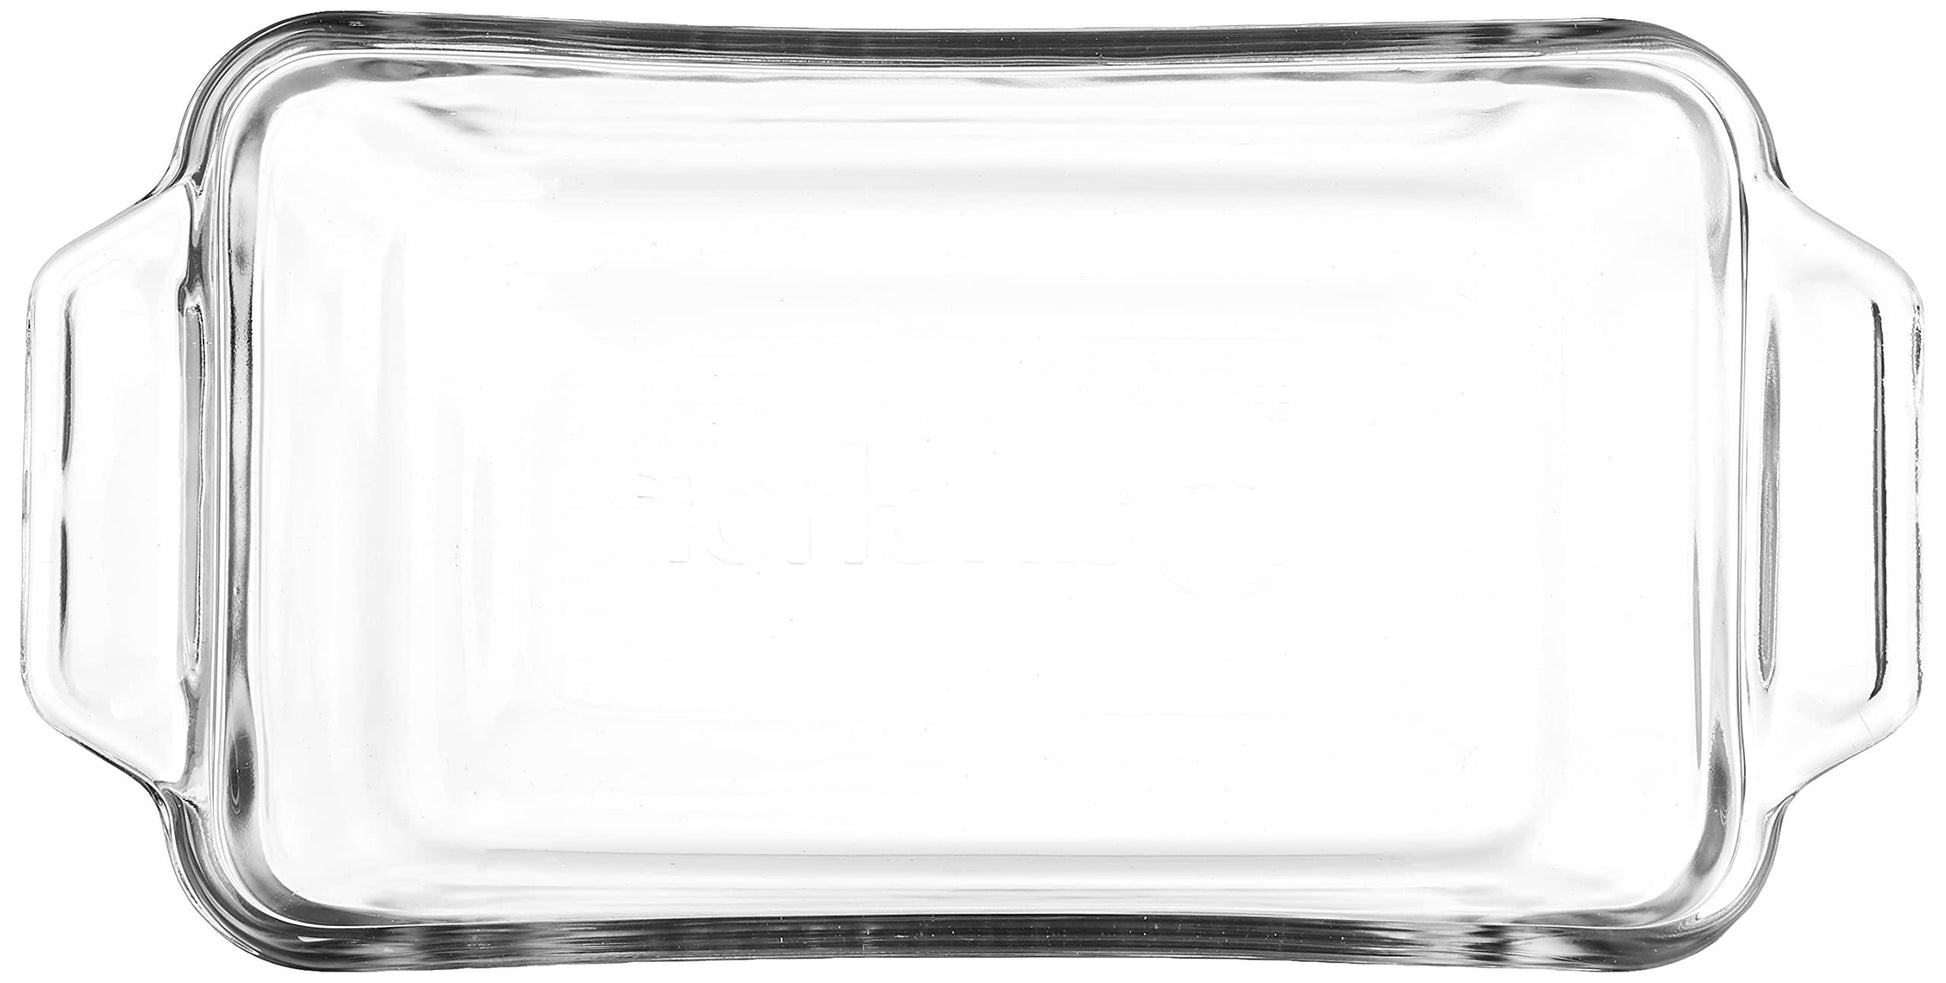 Anchor Hocking Glass Bread Pan, 1.5 Quart Loaf Pan, Set of 3 - CookCave